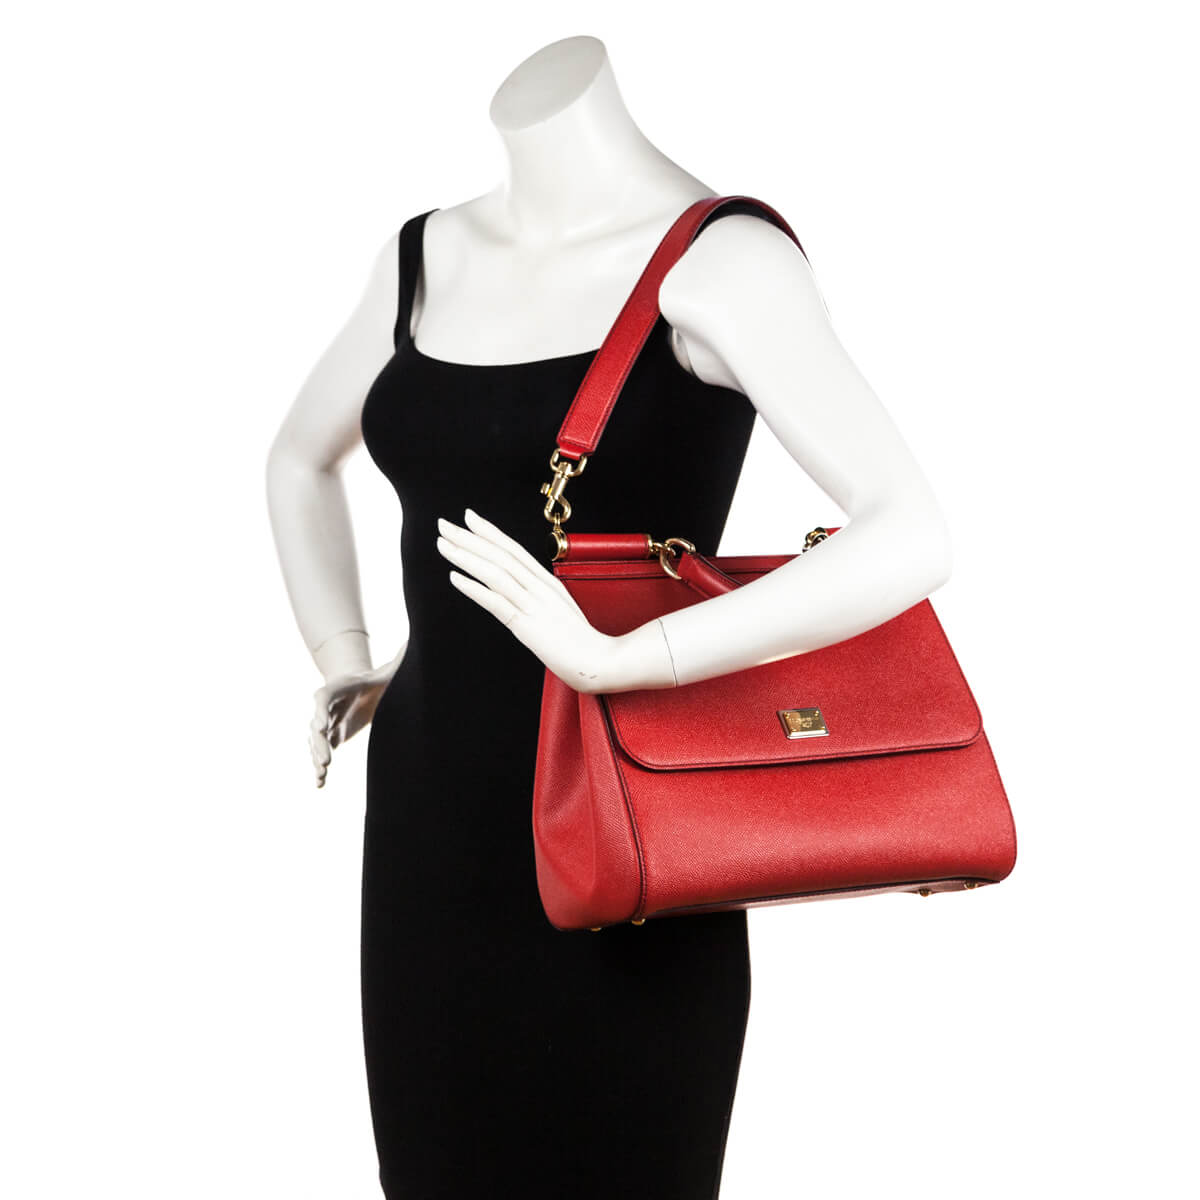 Dolce & Gabbana Red Leather Large Miss Sicily Top Handle Bag Dolce & Gabbana